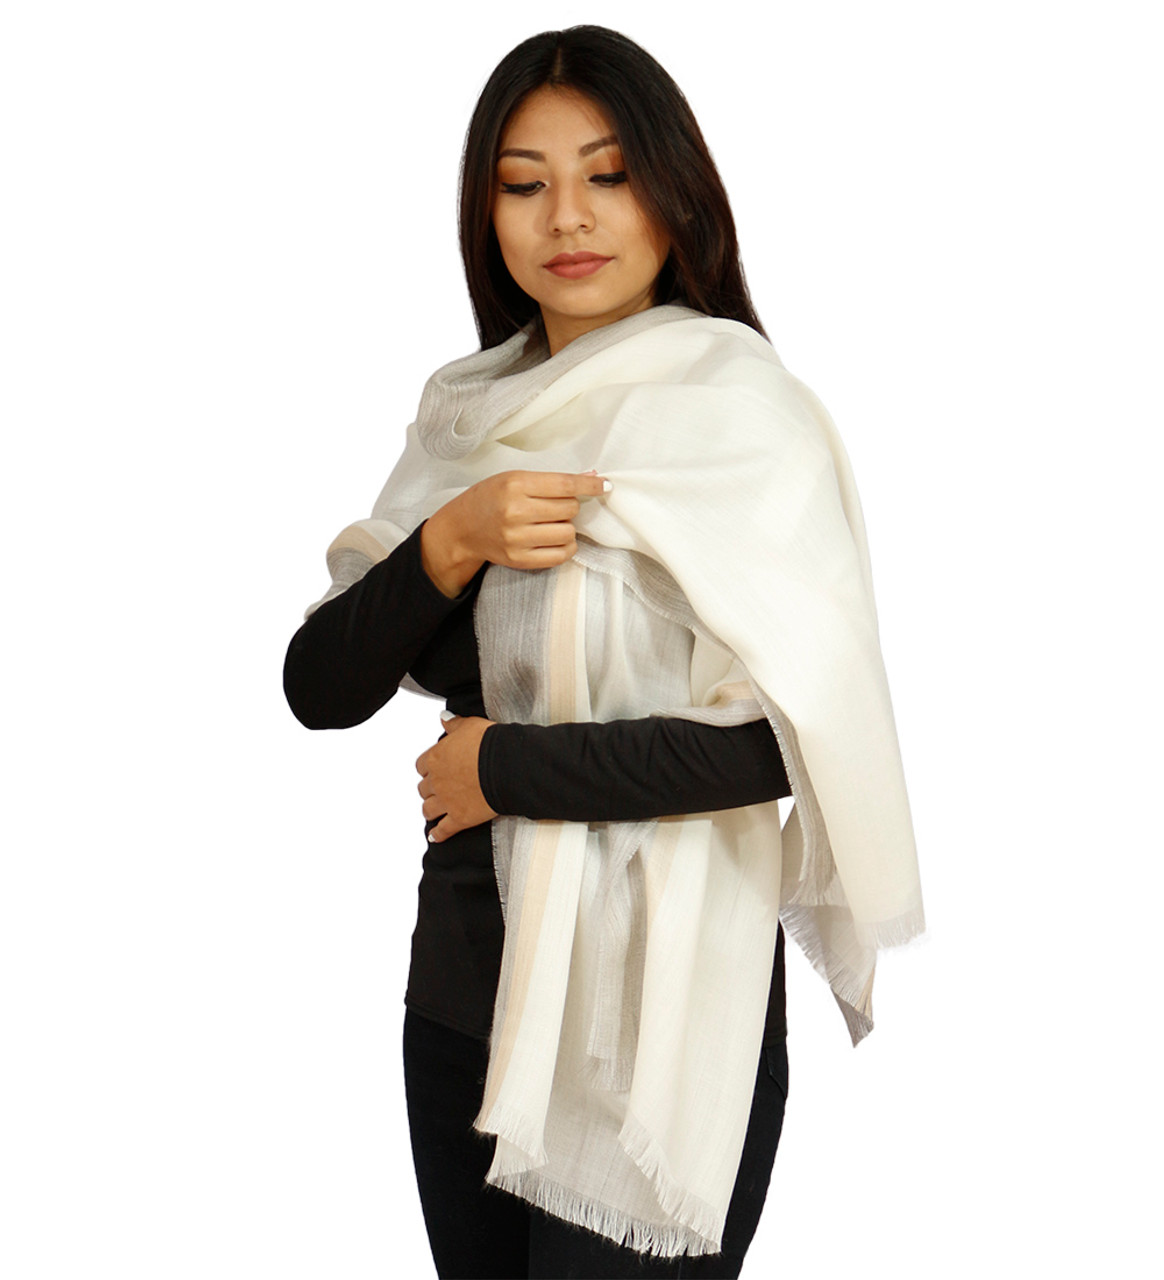 Woven Baby Alpaca Wool Shawl Wrap For Women Heavenly Soft And Warm Ecoline  No Dyes Natural Colors Satin Tricolor Design